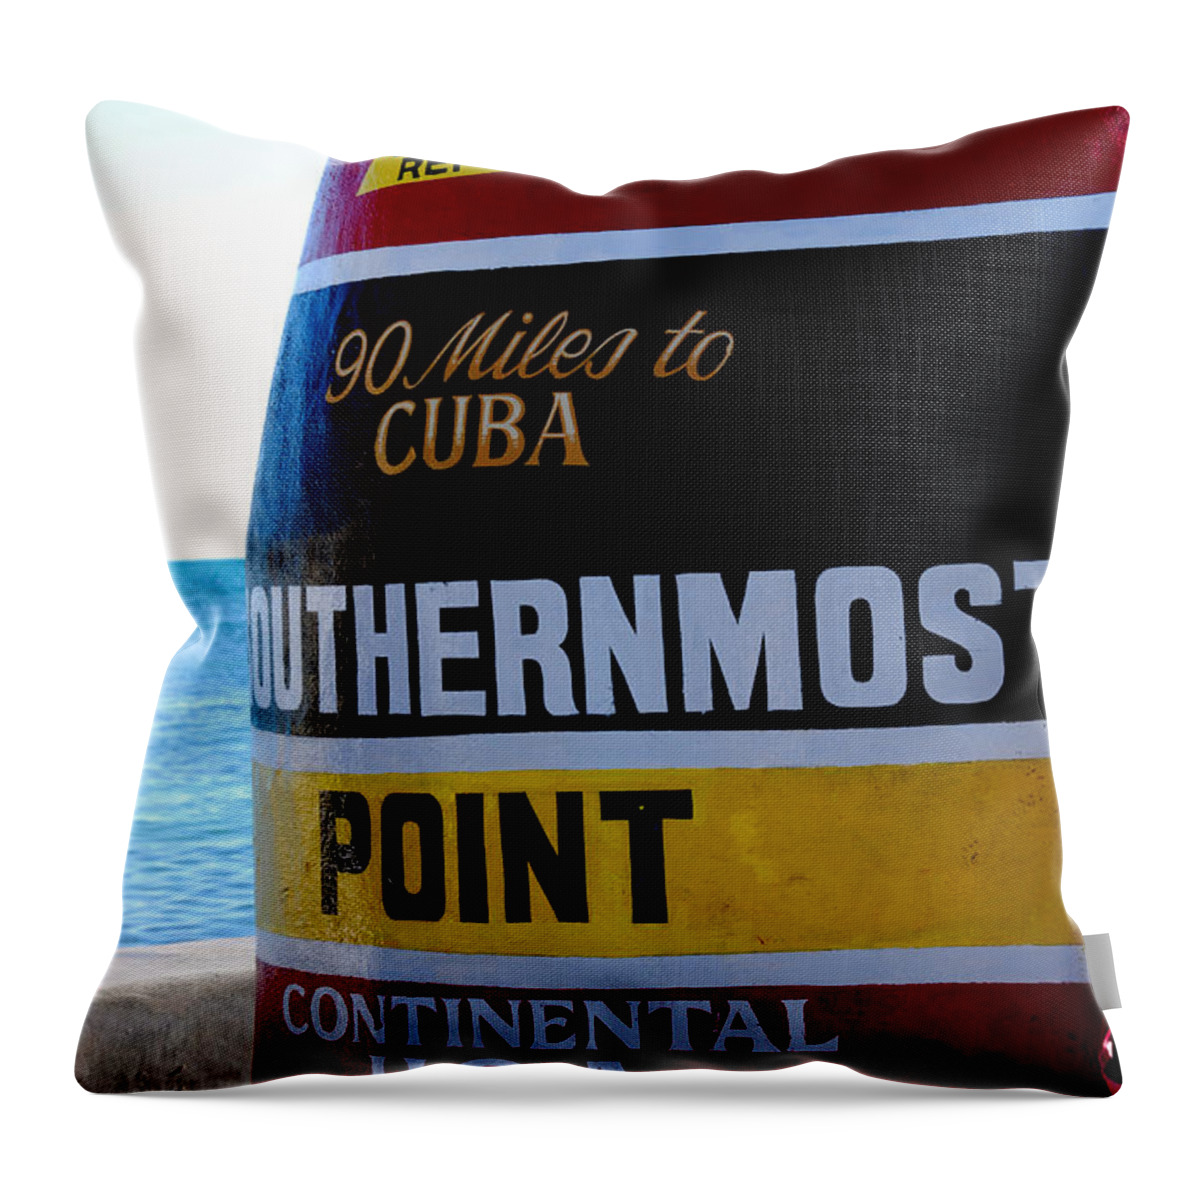 Photography Throw Pillow featuring the photograph Only 90 Miles to Cuba by Susanne Van Hulst